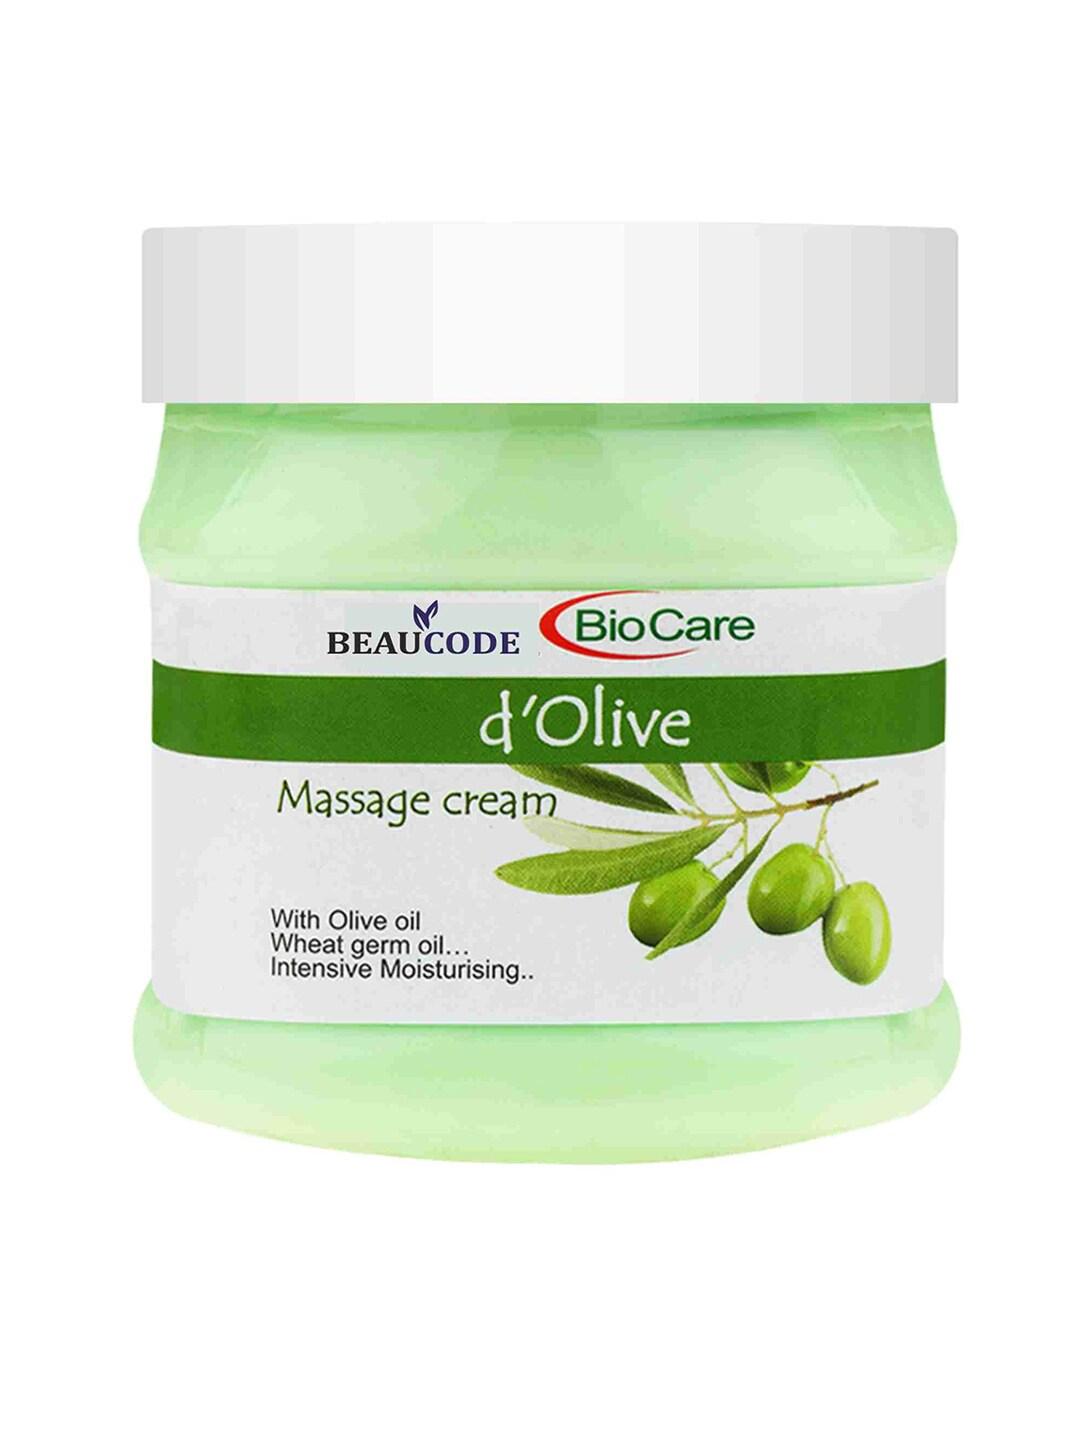 BEAUCODE BIOCARE d'Olive Massage Cream with Olive Oil & Wheat Germ Oil - 250ml